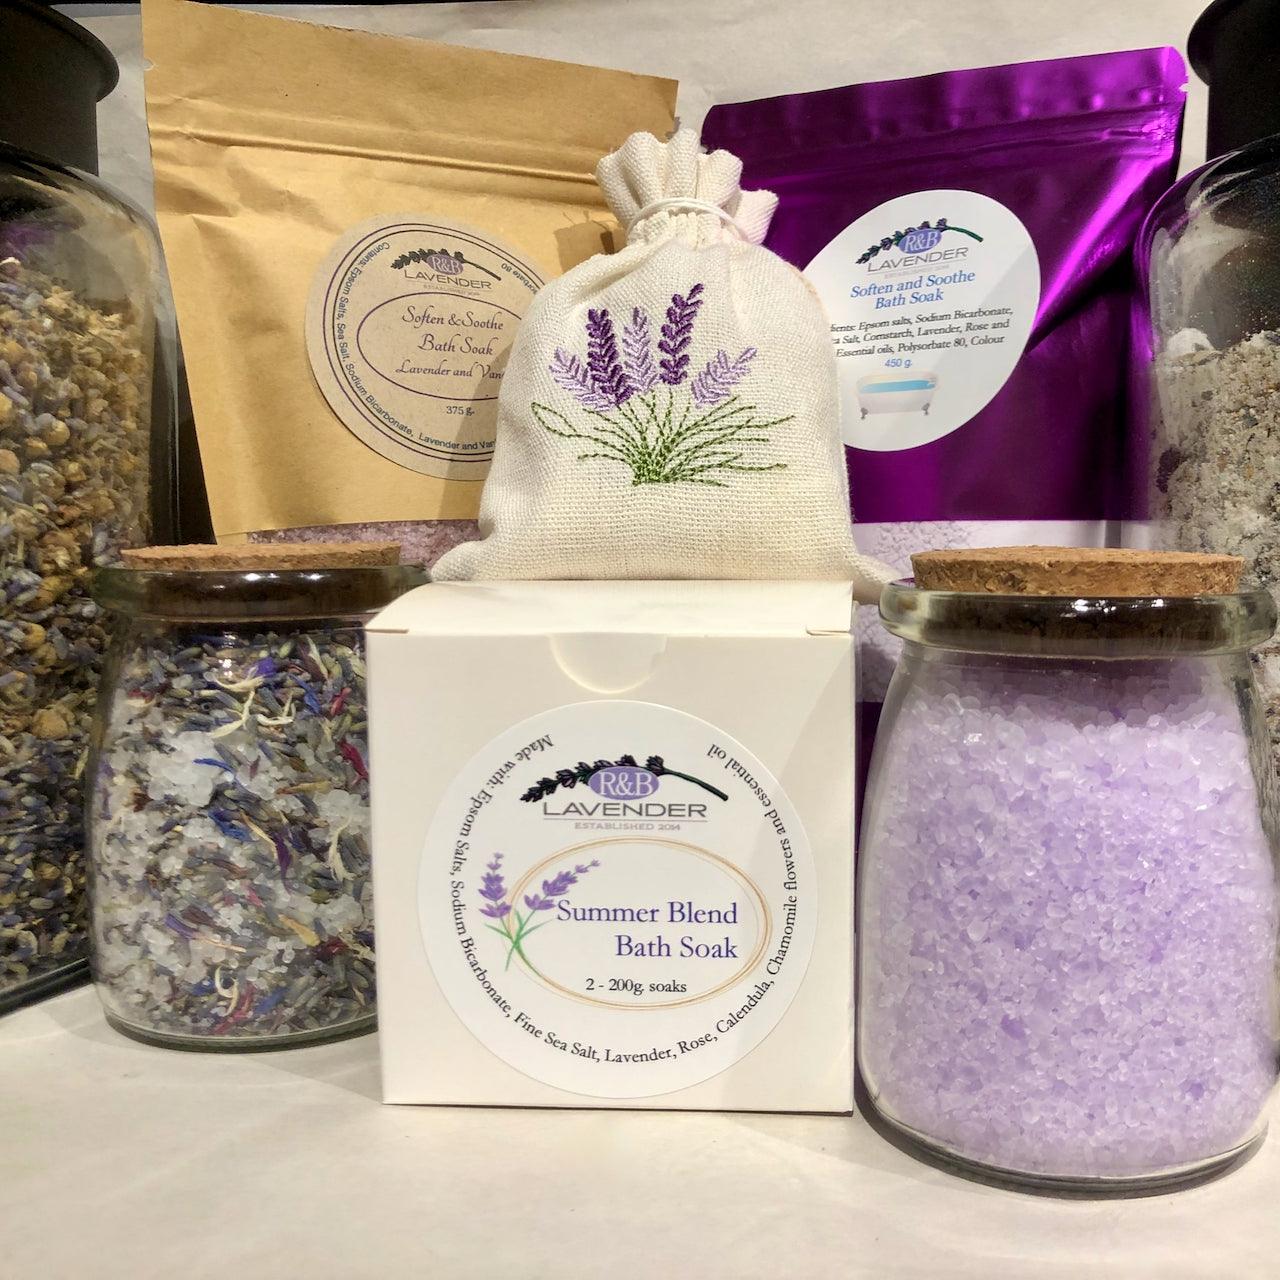 Bath Soaks - Soften and Soothe - R&B Lavender